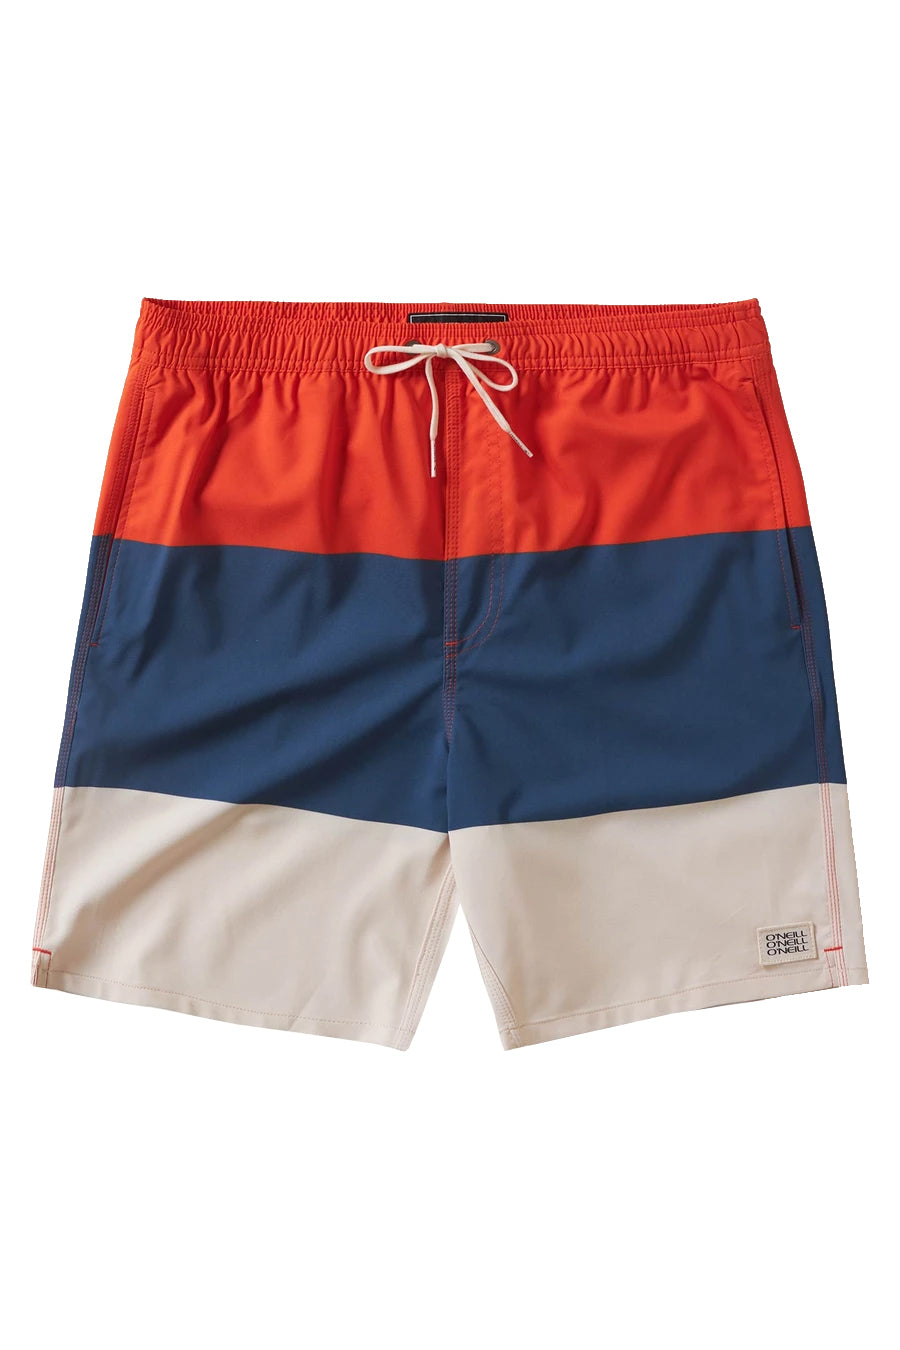 O'neill Mixed Up 17" Volley Boardshorts TANG-Tangerine M